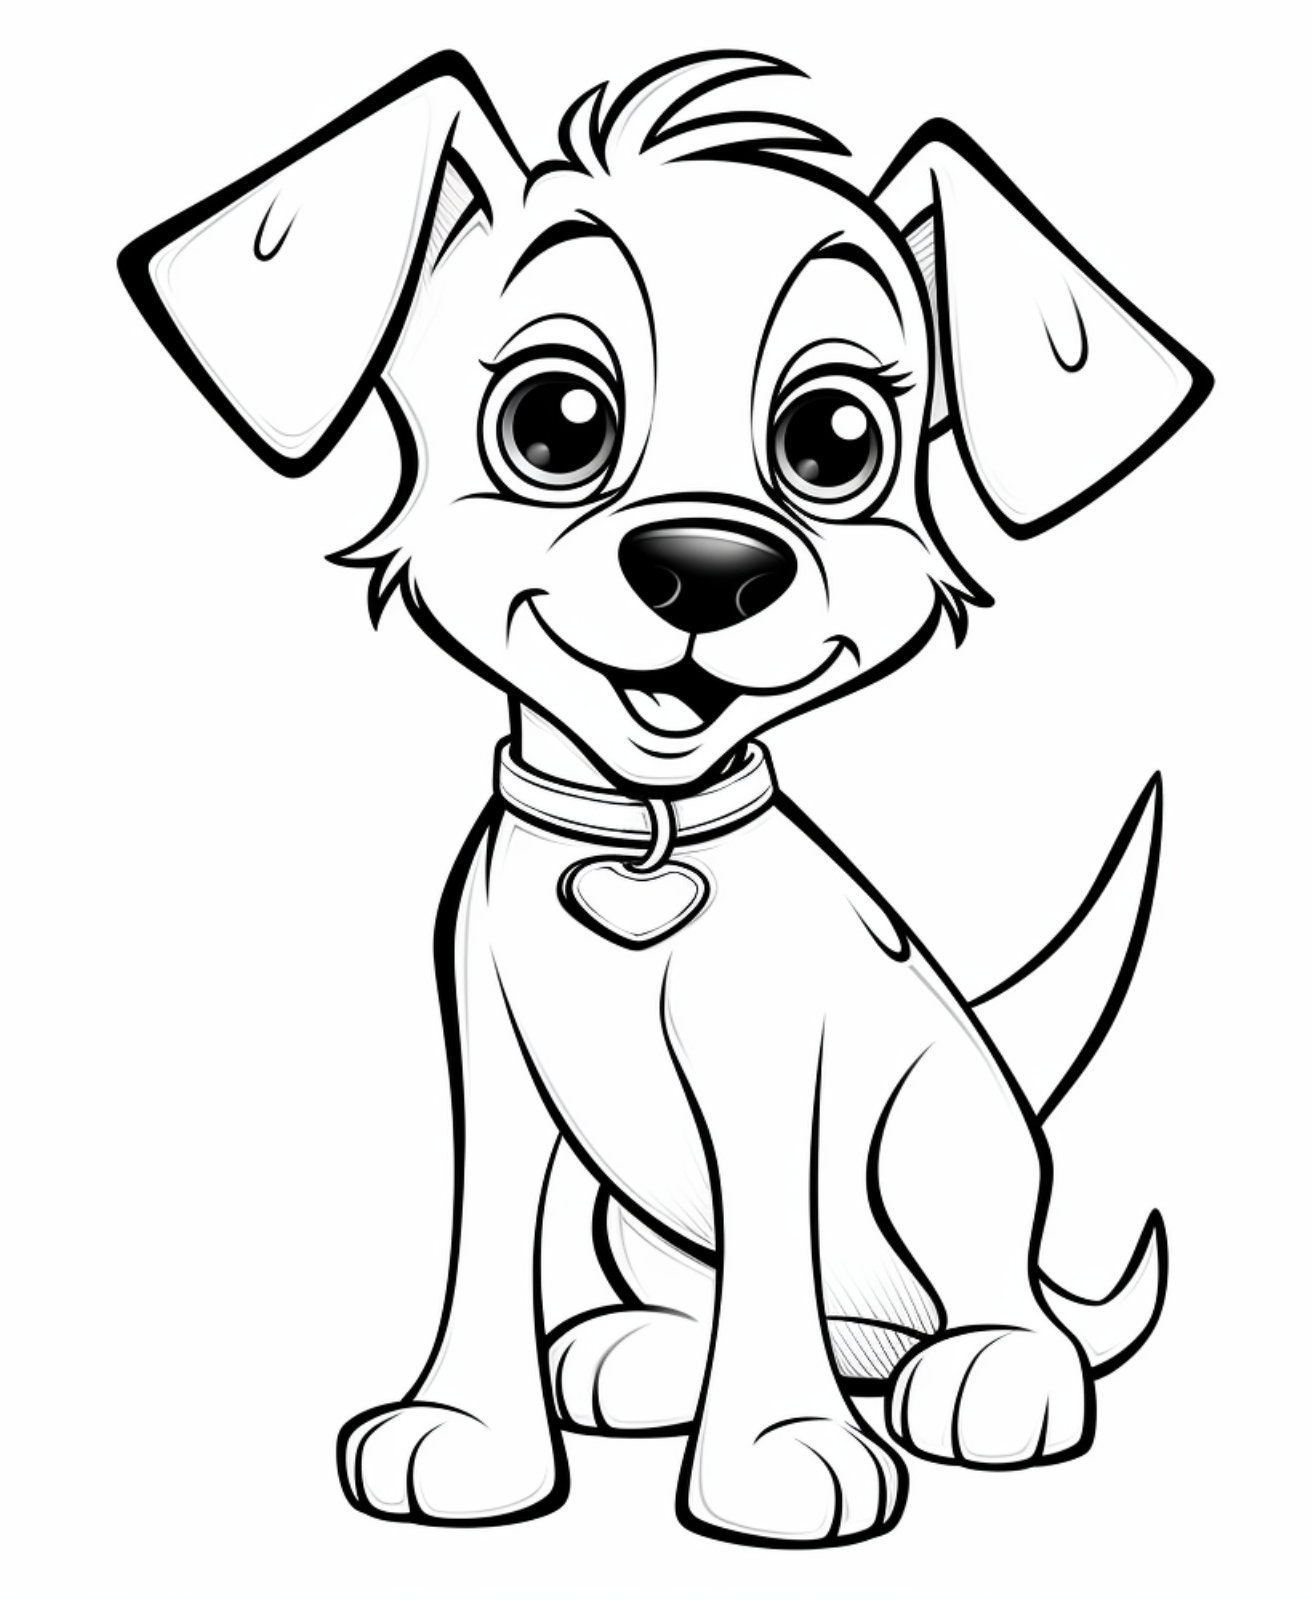 4 Printable Coloring Pages of Dogs for Coloring Printable Art for Kids ...